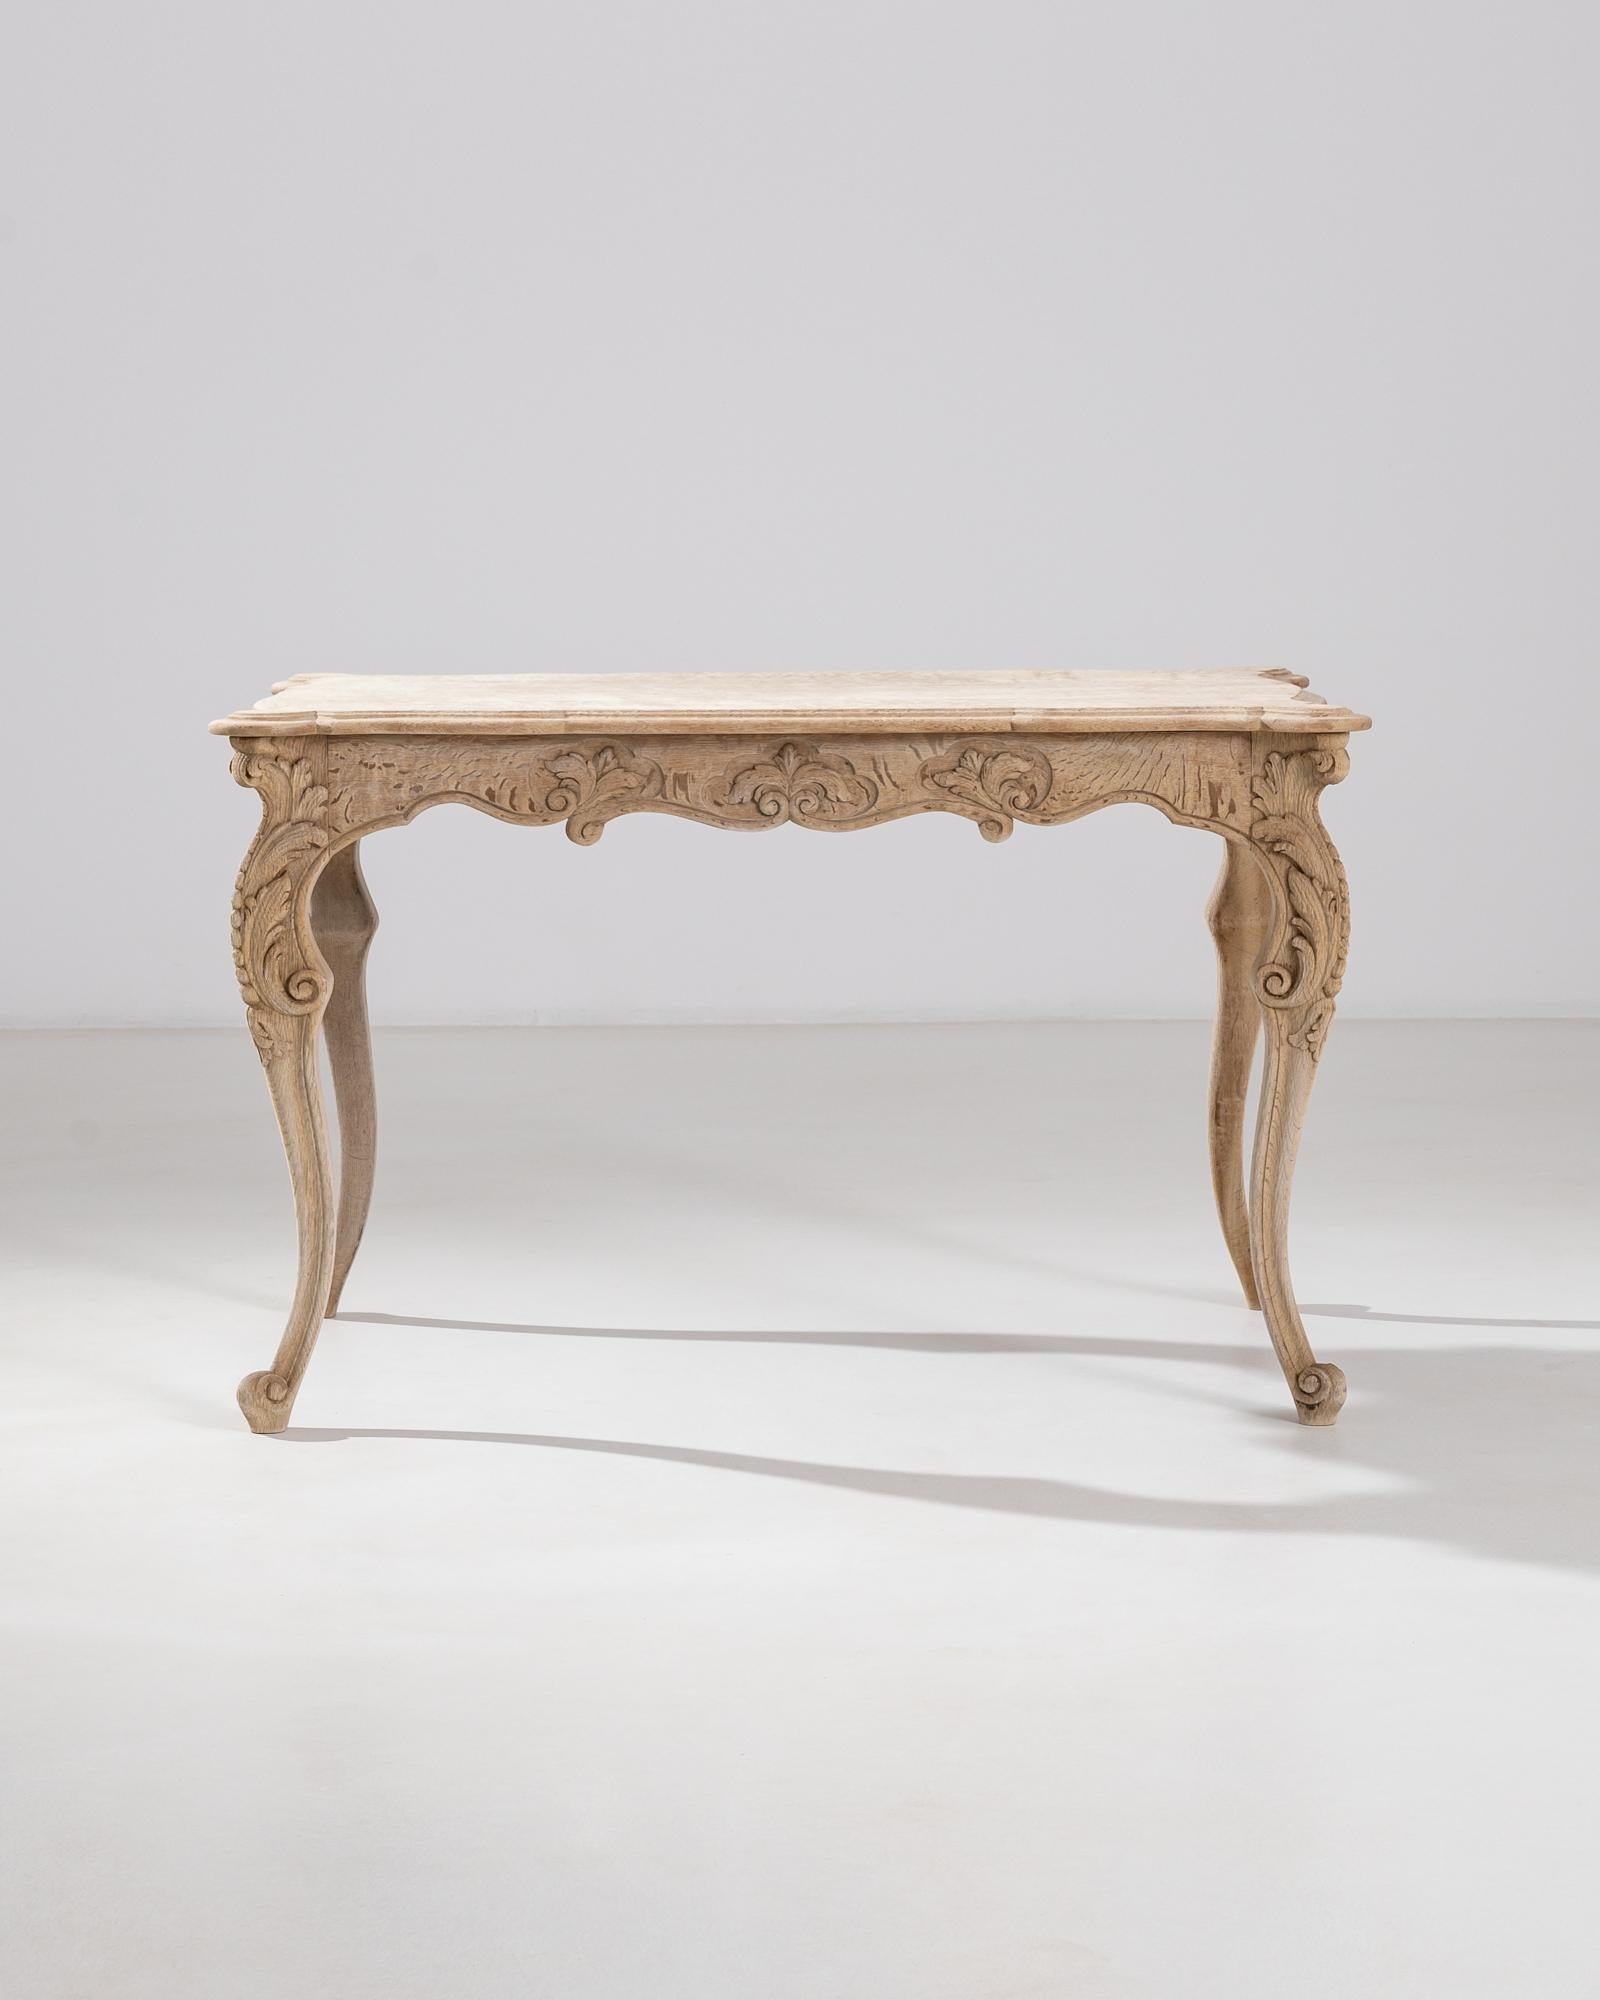 This oak table was produced in France, circa 1850. With a baroque inspiration, this piece displays a scalloped apron, intricately carved, and a curving cabriole leg. Adorned with carved foliage, scrolls and pearl-like dots meandering along the legs.